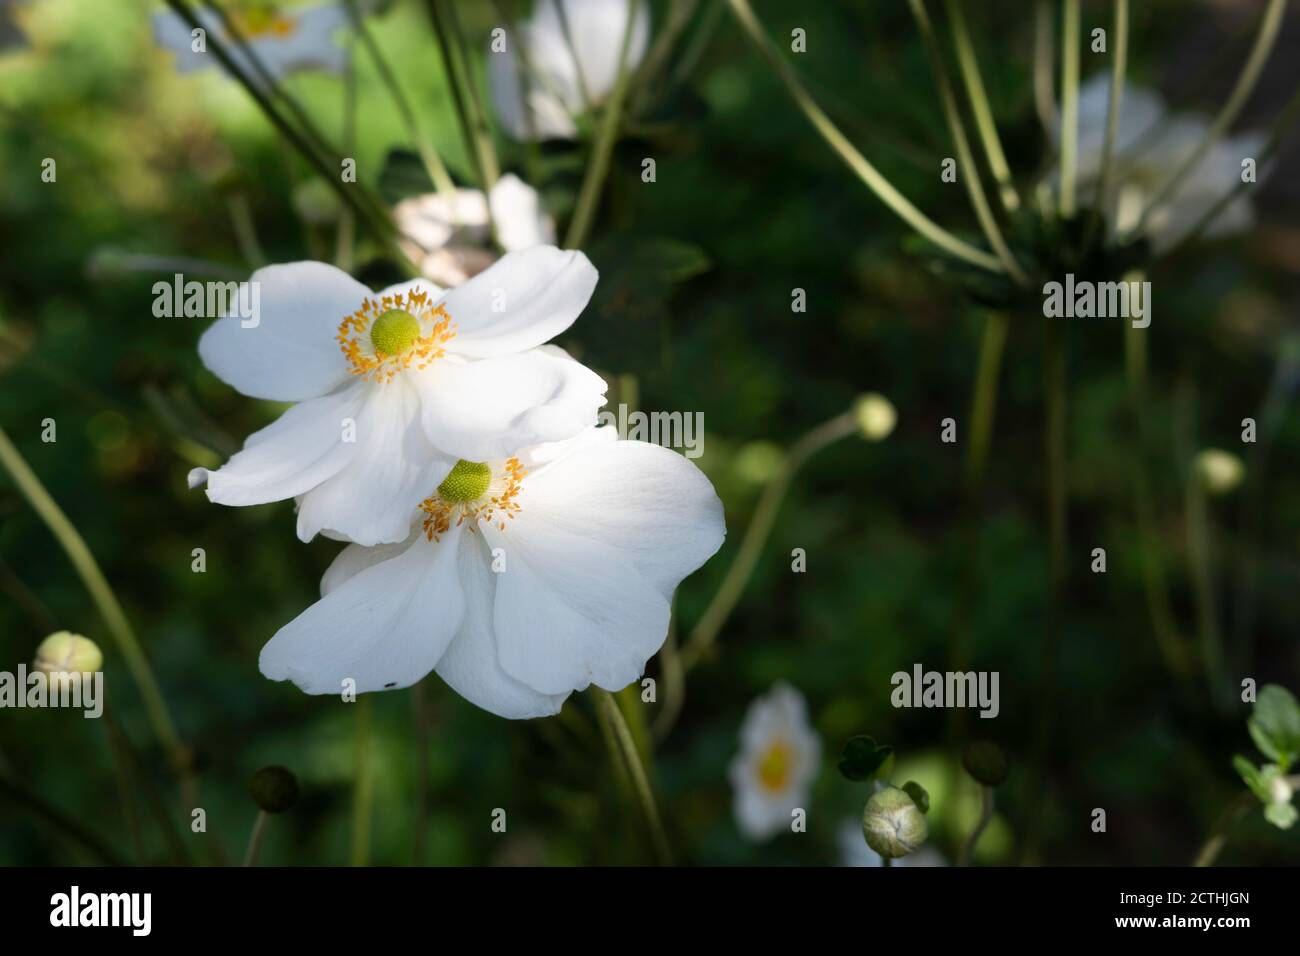 White Anemones hybrida Honorine Jobert flowers with branches and blurred green leaves in background Stock Photo